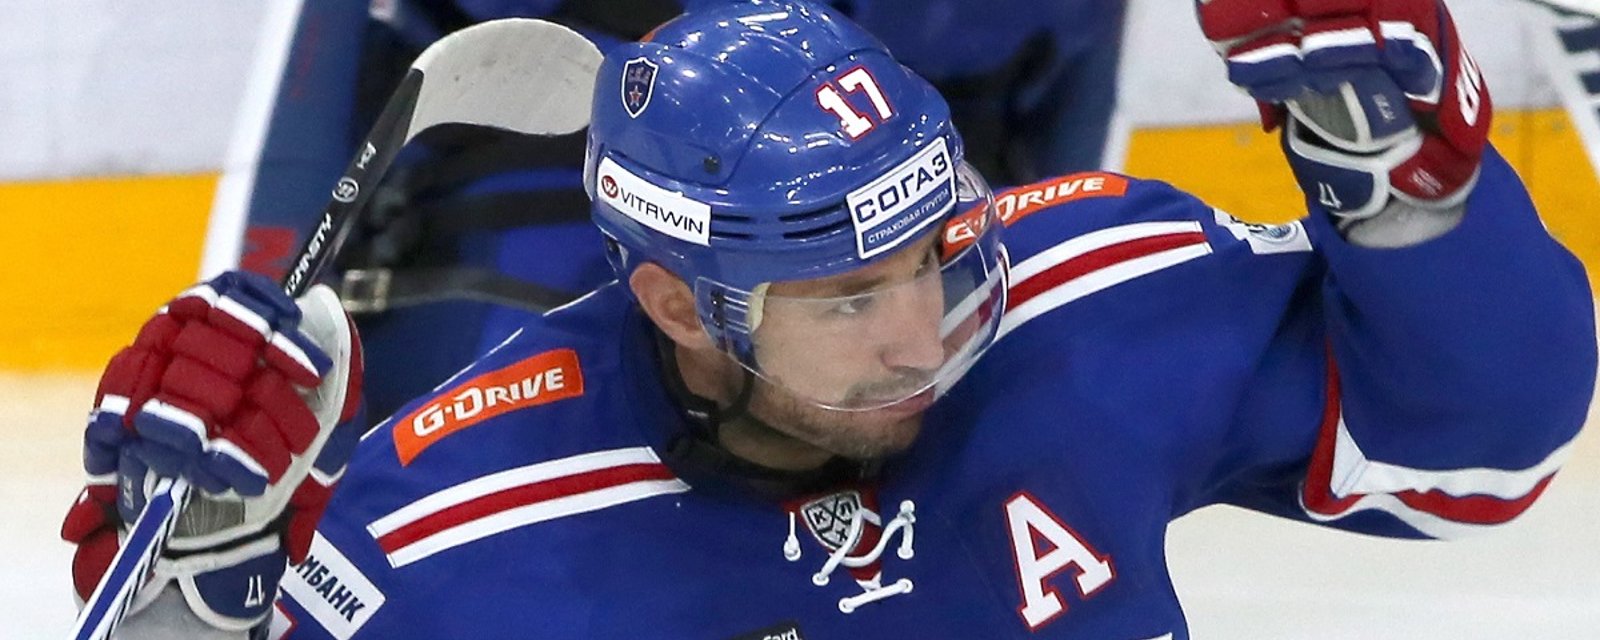 Breaking: Conflicting reports claim Ilya Kovalchuk has made his decision!